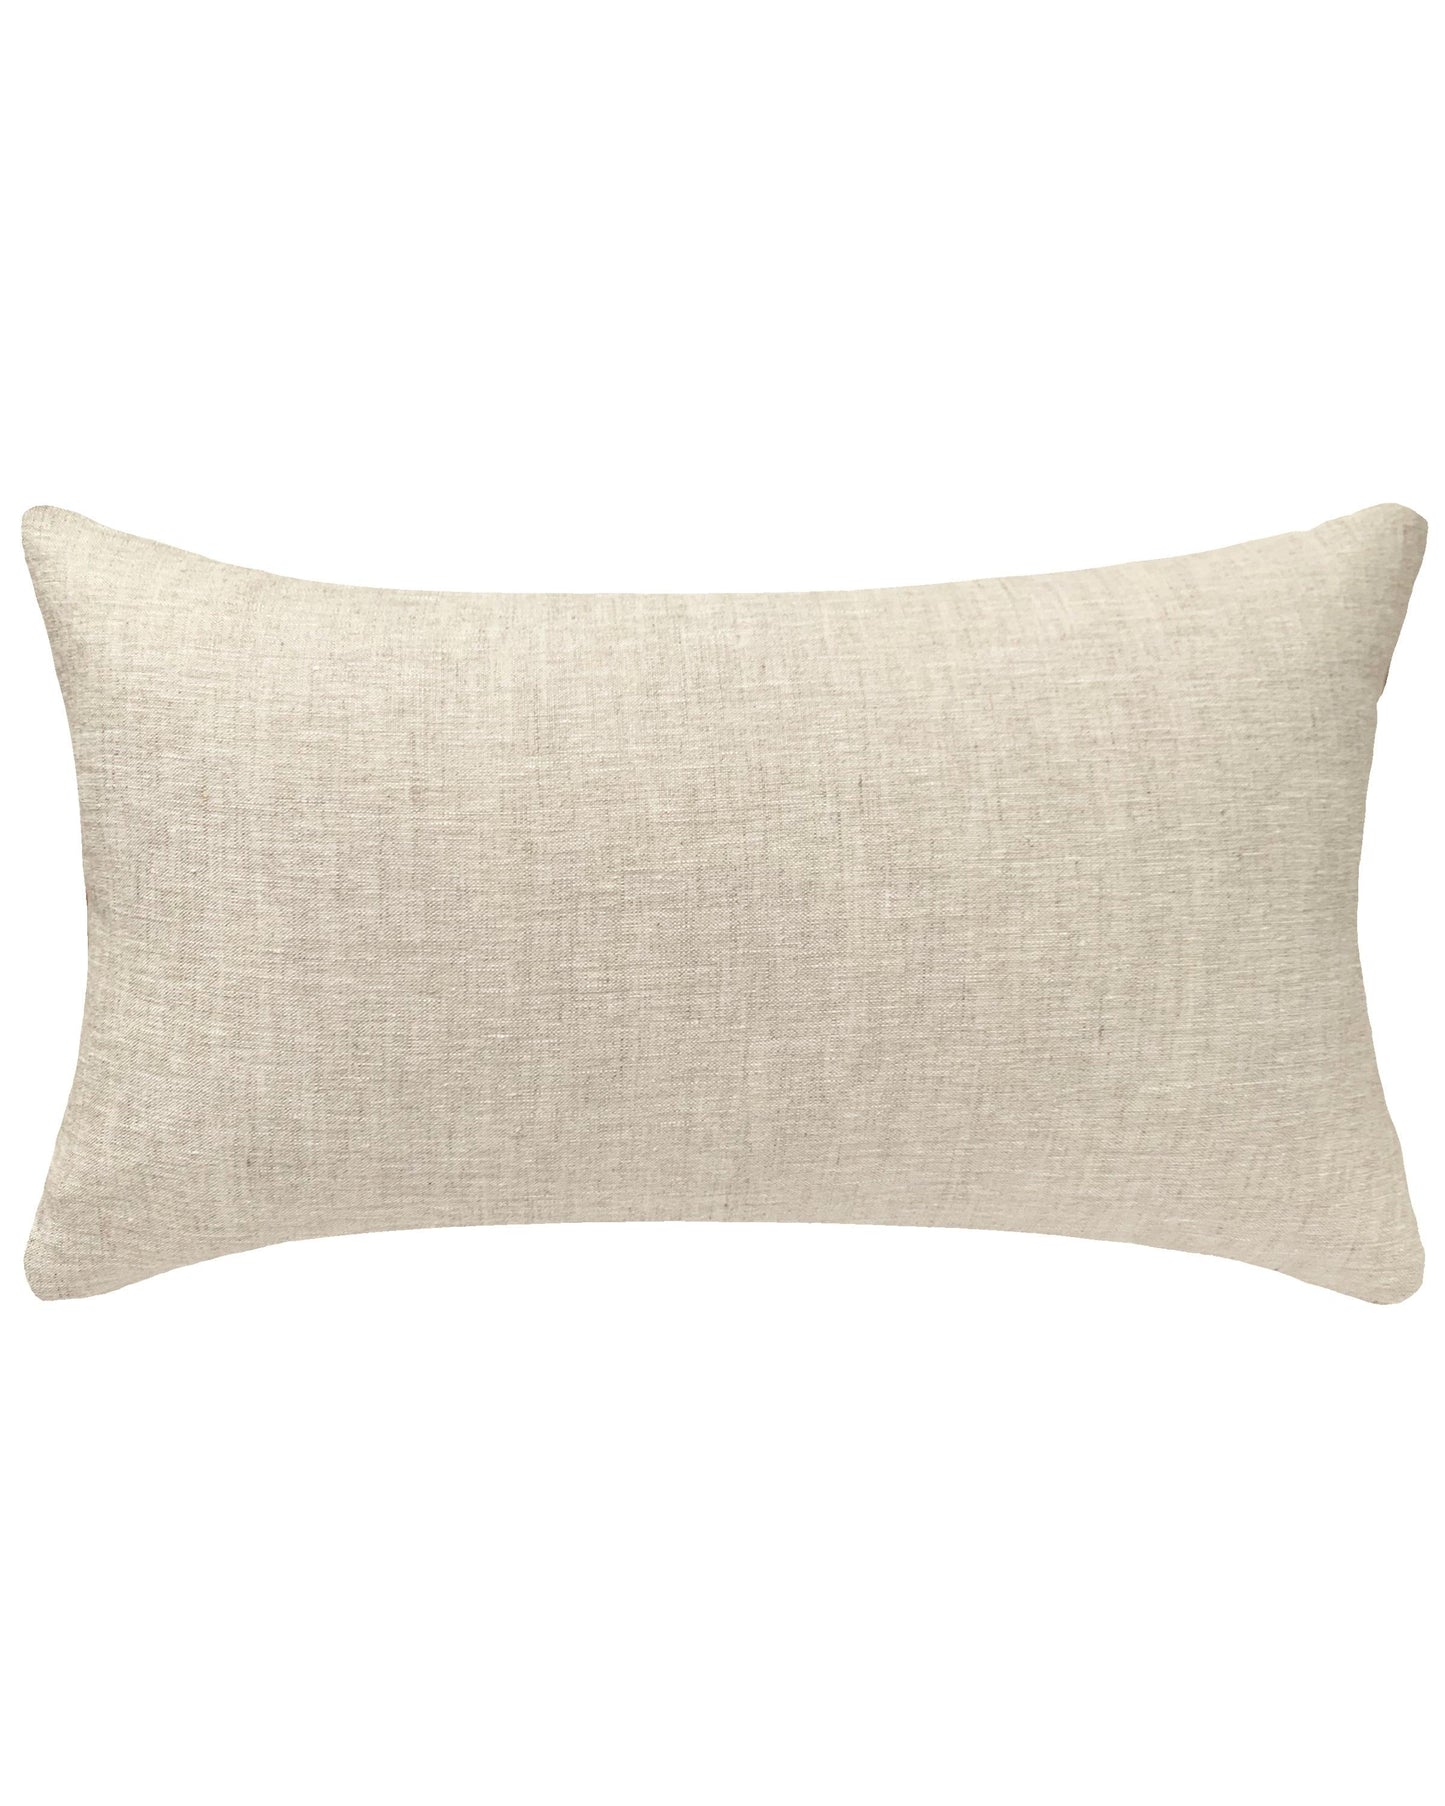 PILLOWPIA cowrie embroidered lumbar pillow in natural